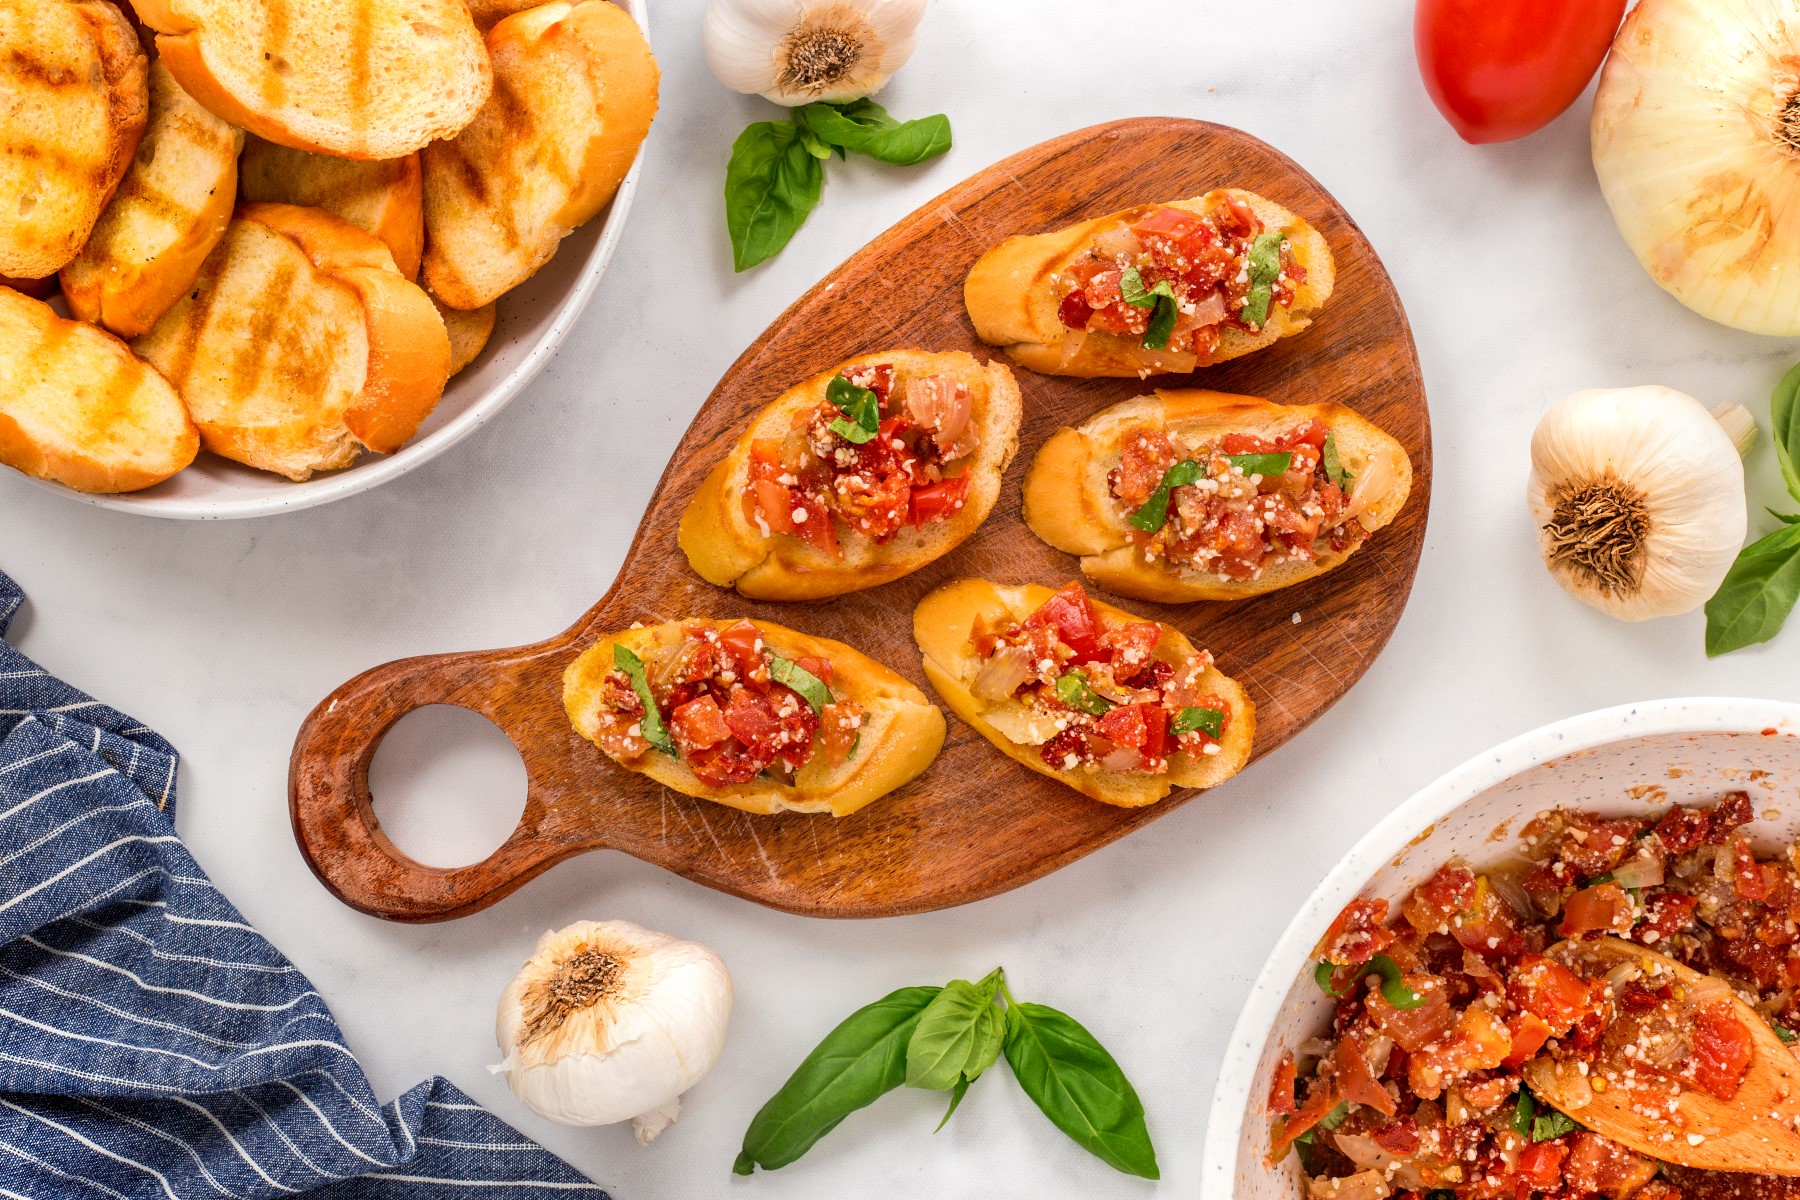 Grilled tomato bruschetta served on a wooden board with extra toasts and a bowl of bruschetta beside the board.